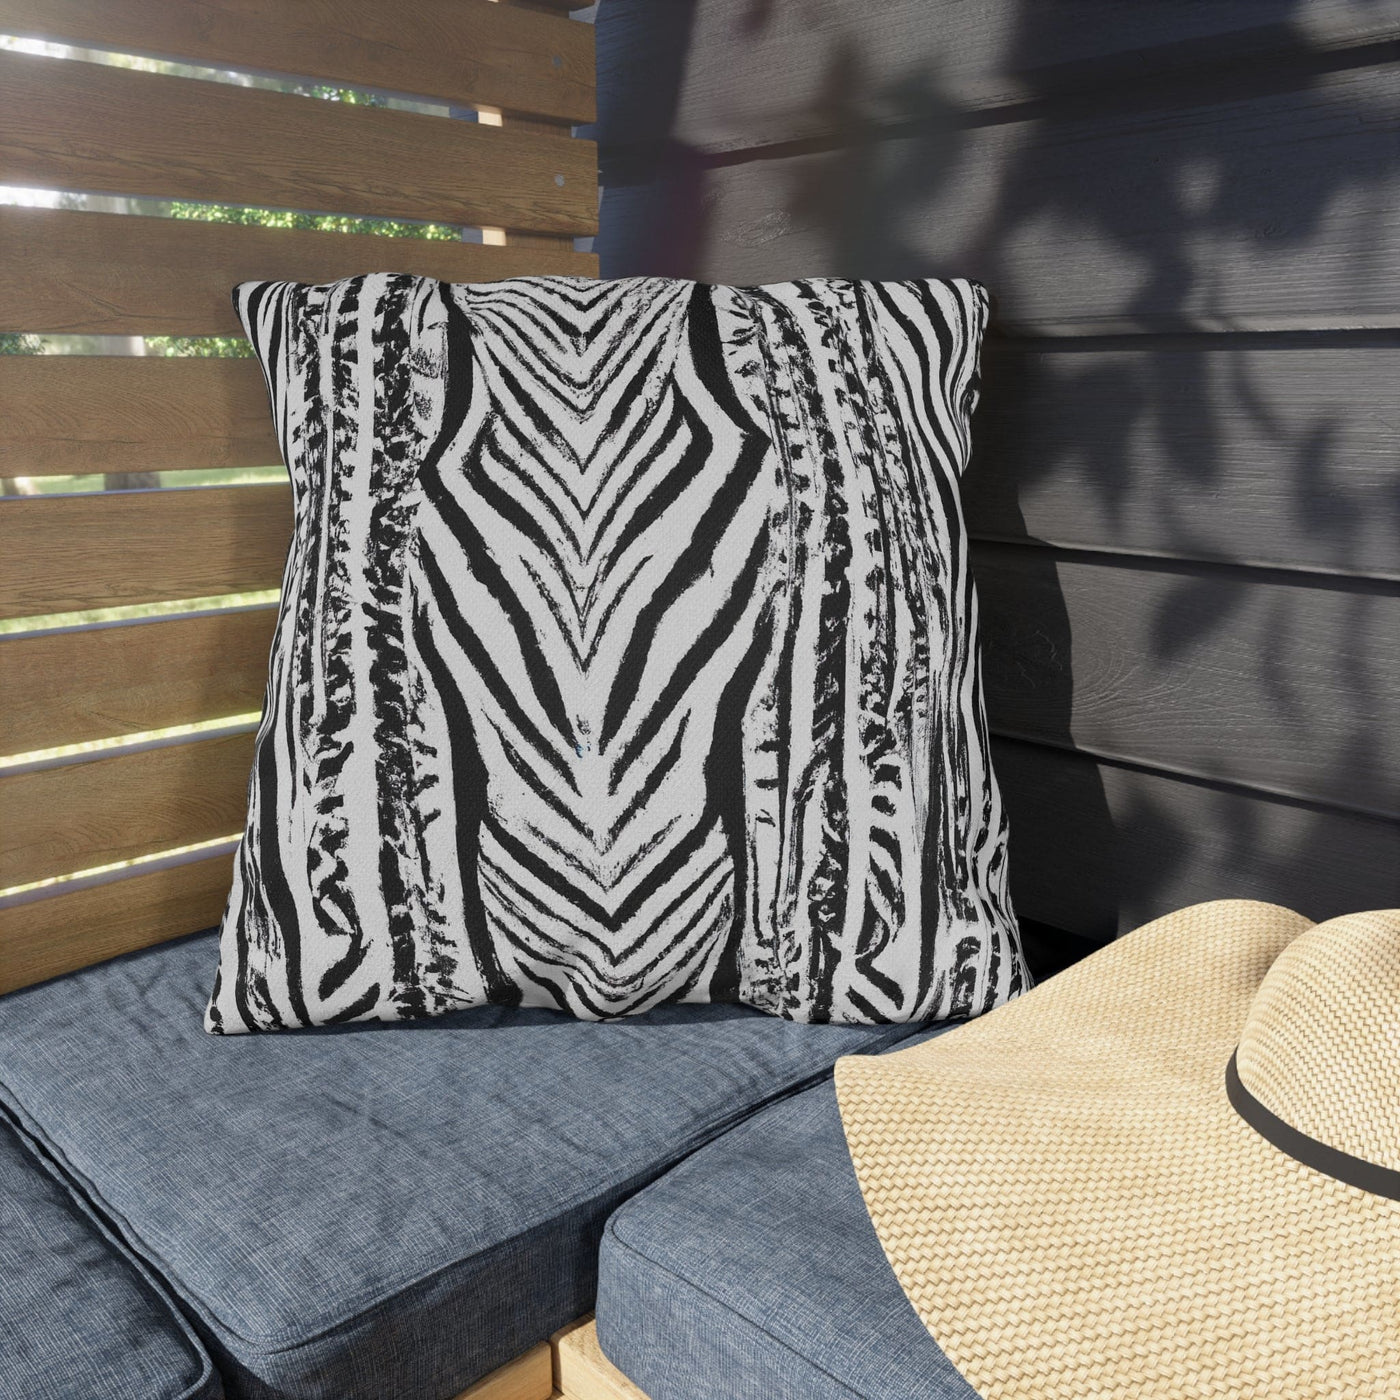 Decorative Outdoor Pillows With Zipper - Set Of 2 Native Black And White